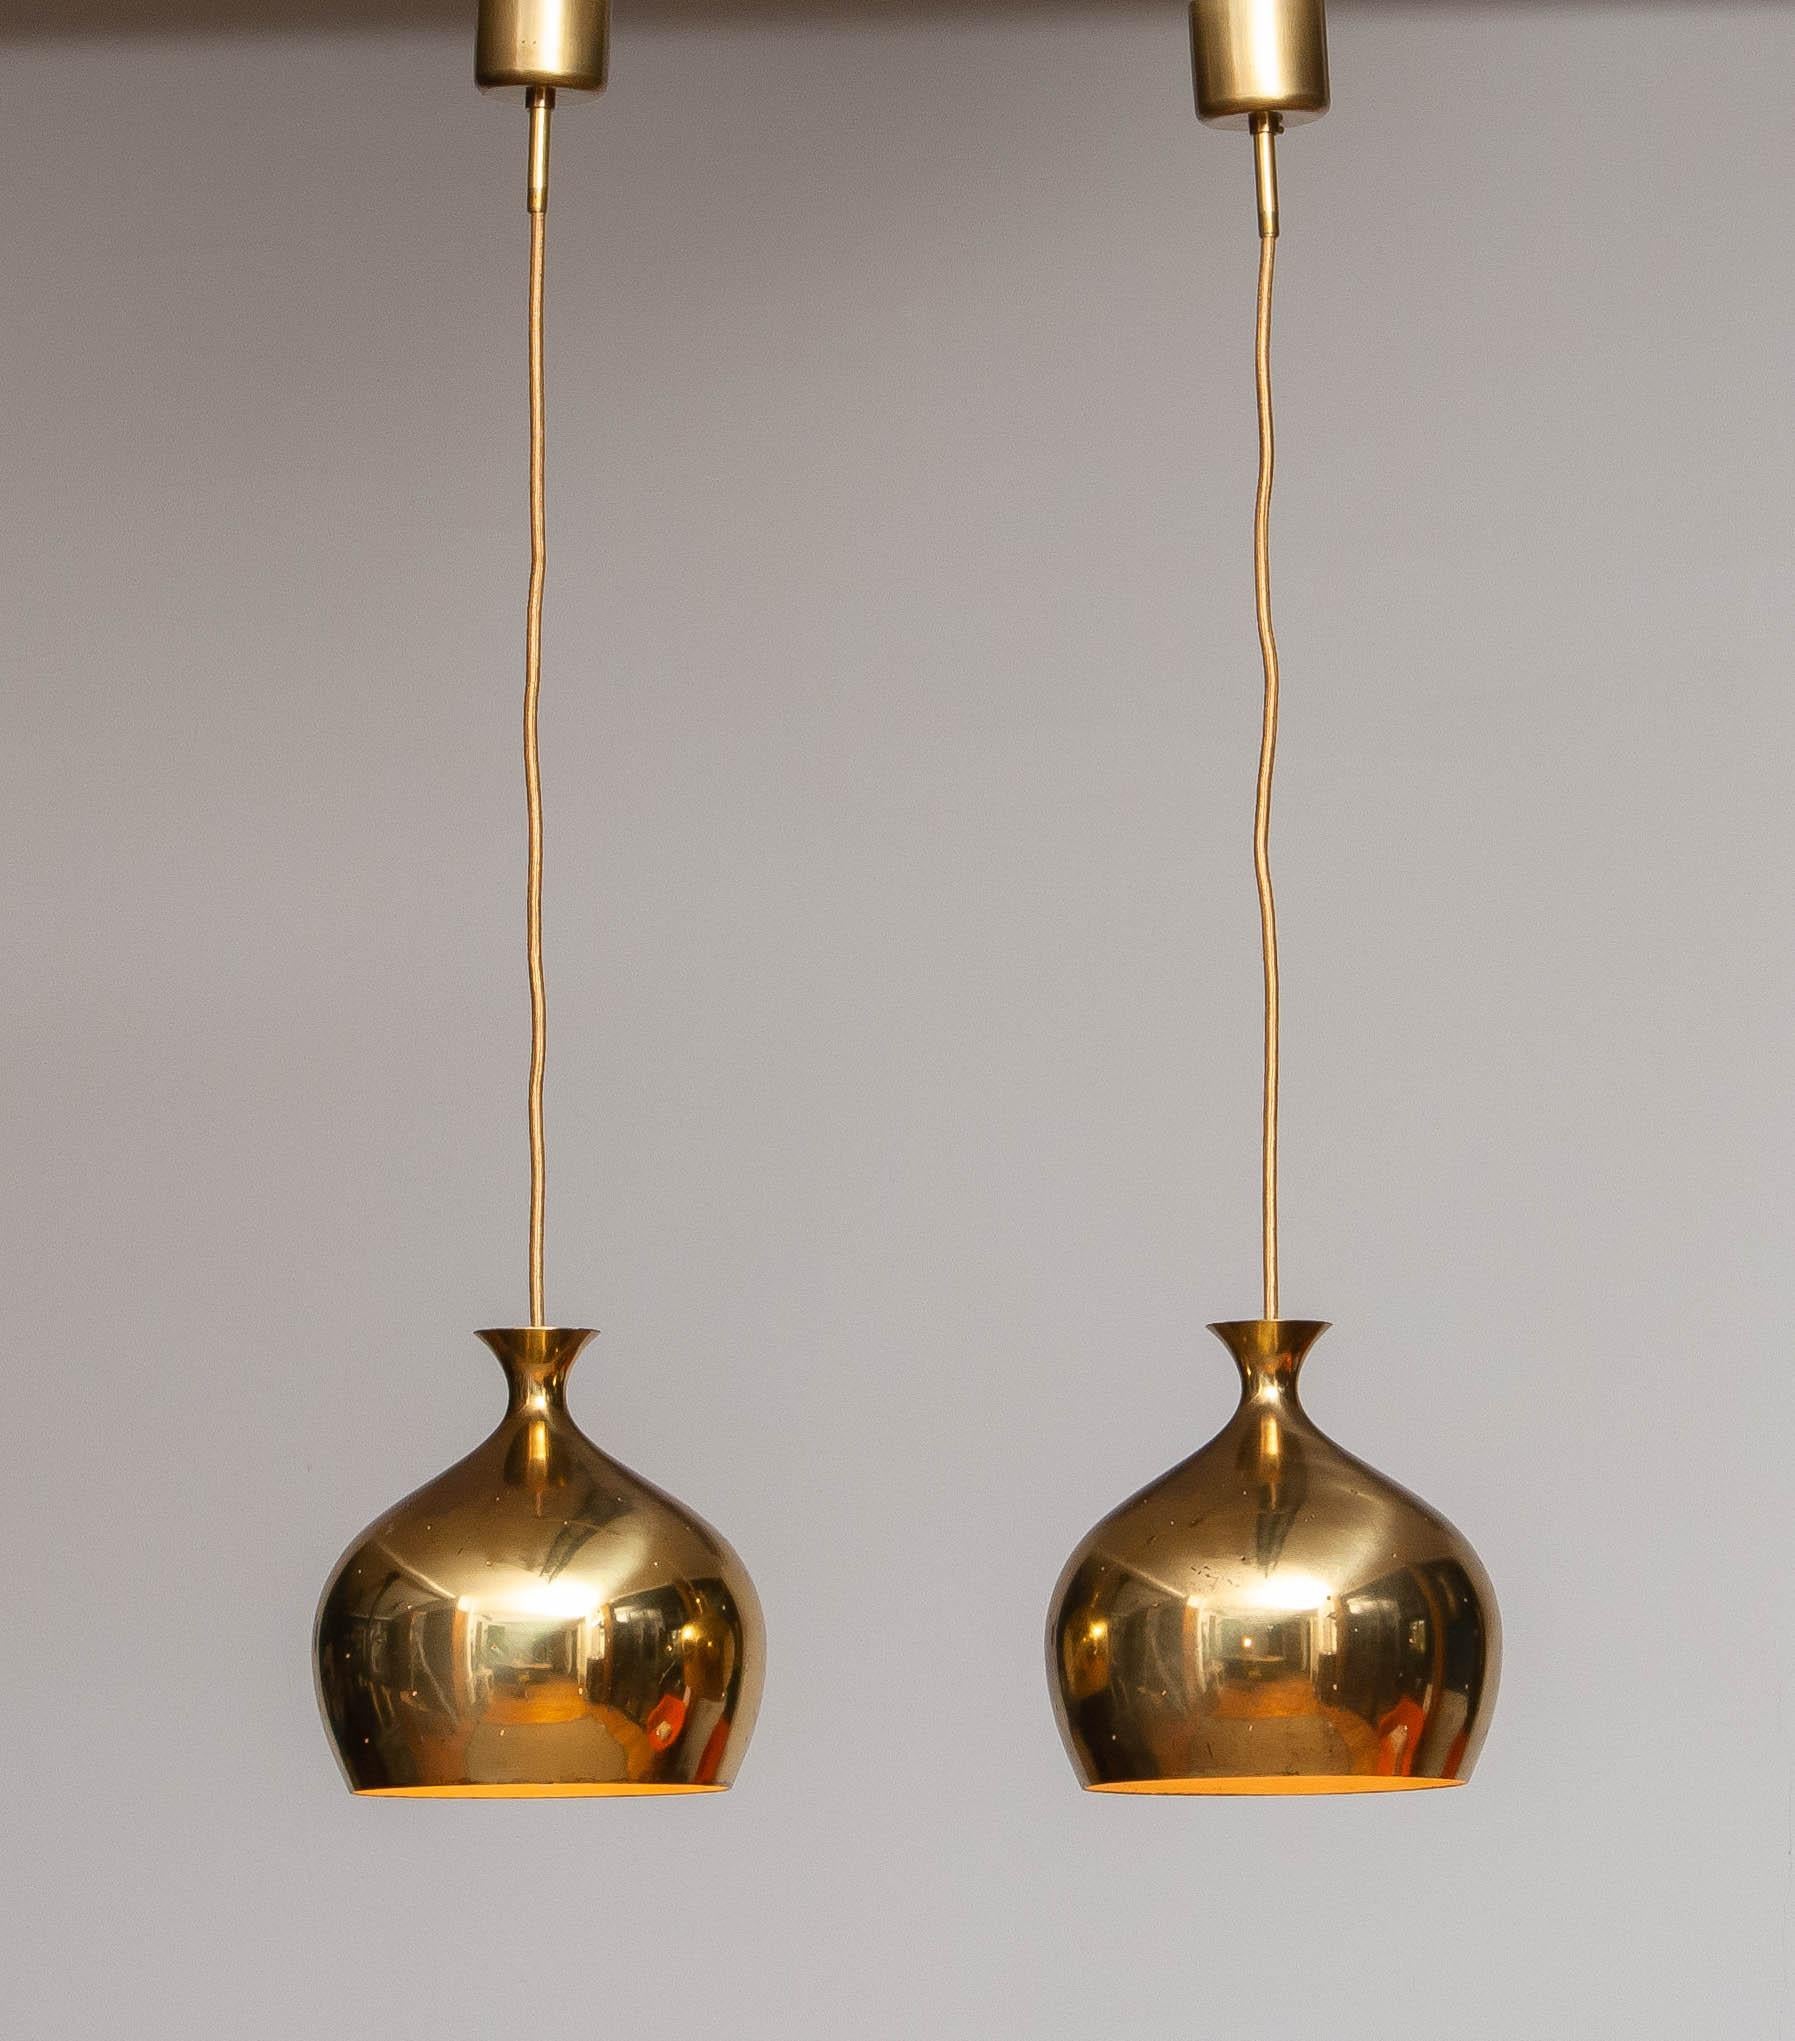 Beautiful pair perforated 'Unions' in brass by Helge Zimdal for Falkenbergs Belysning in Sweden.
Overall these pendants are in good condition. Both consists a screw fitting, size E14.
Technically 100% and suits 110 as well as 230 volts.